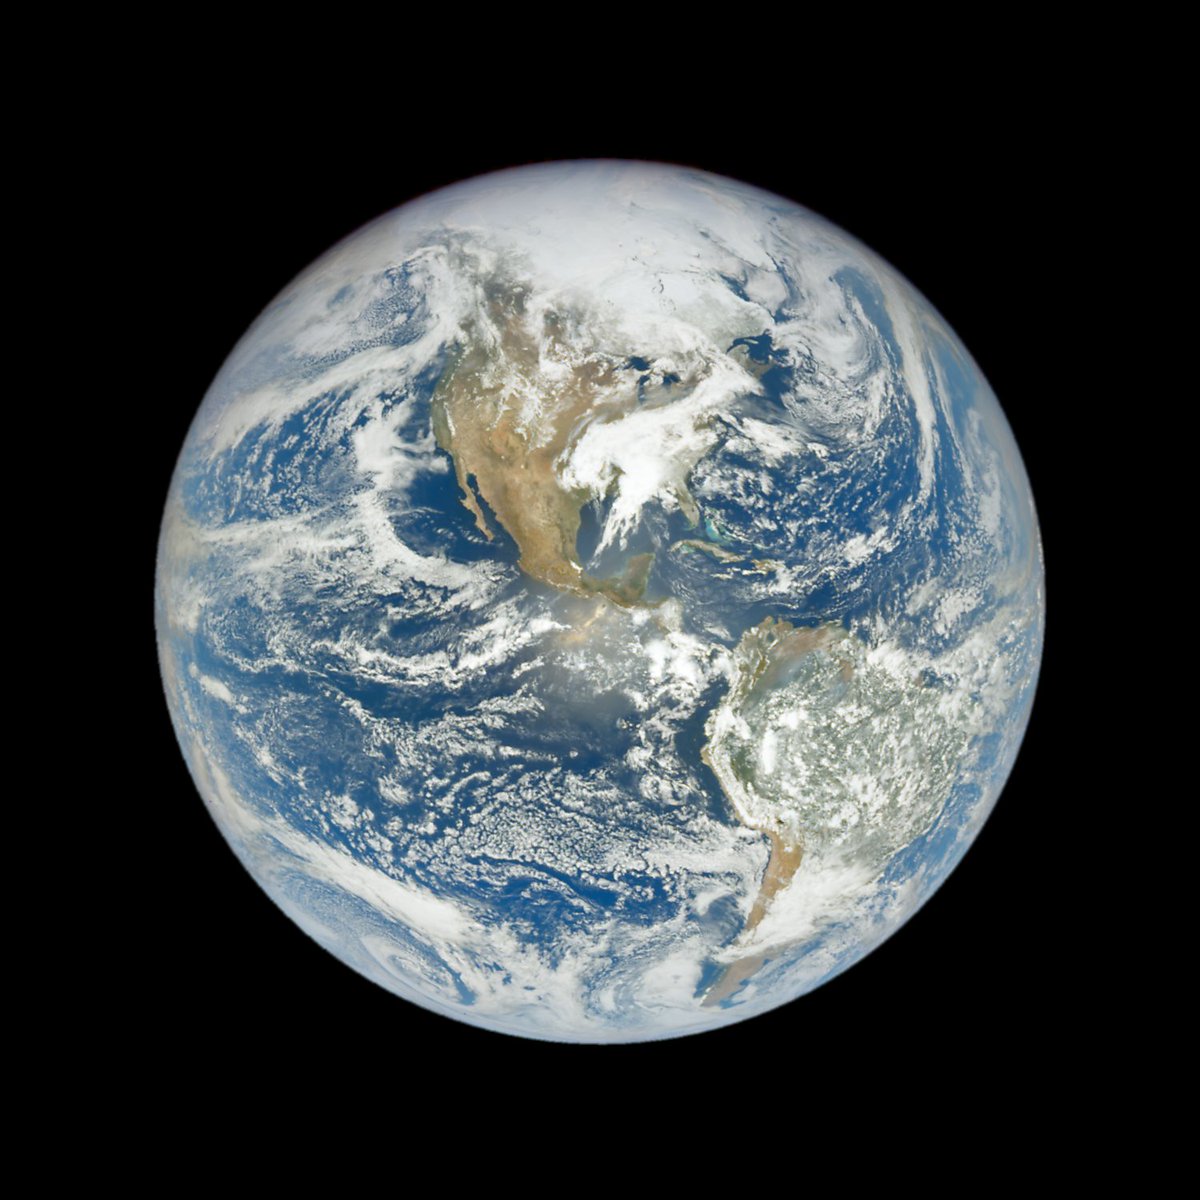 18:13 on Wednesday April 10th, over the North Pacific Ocean